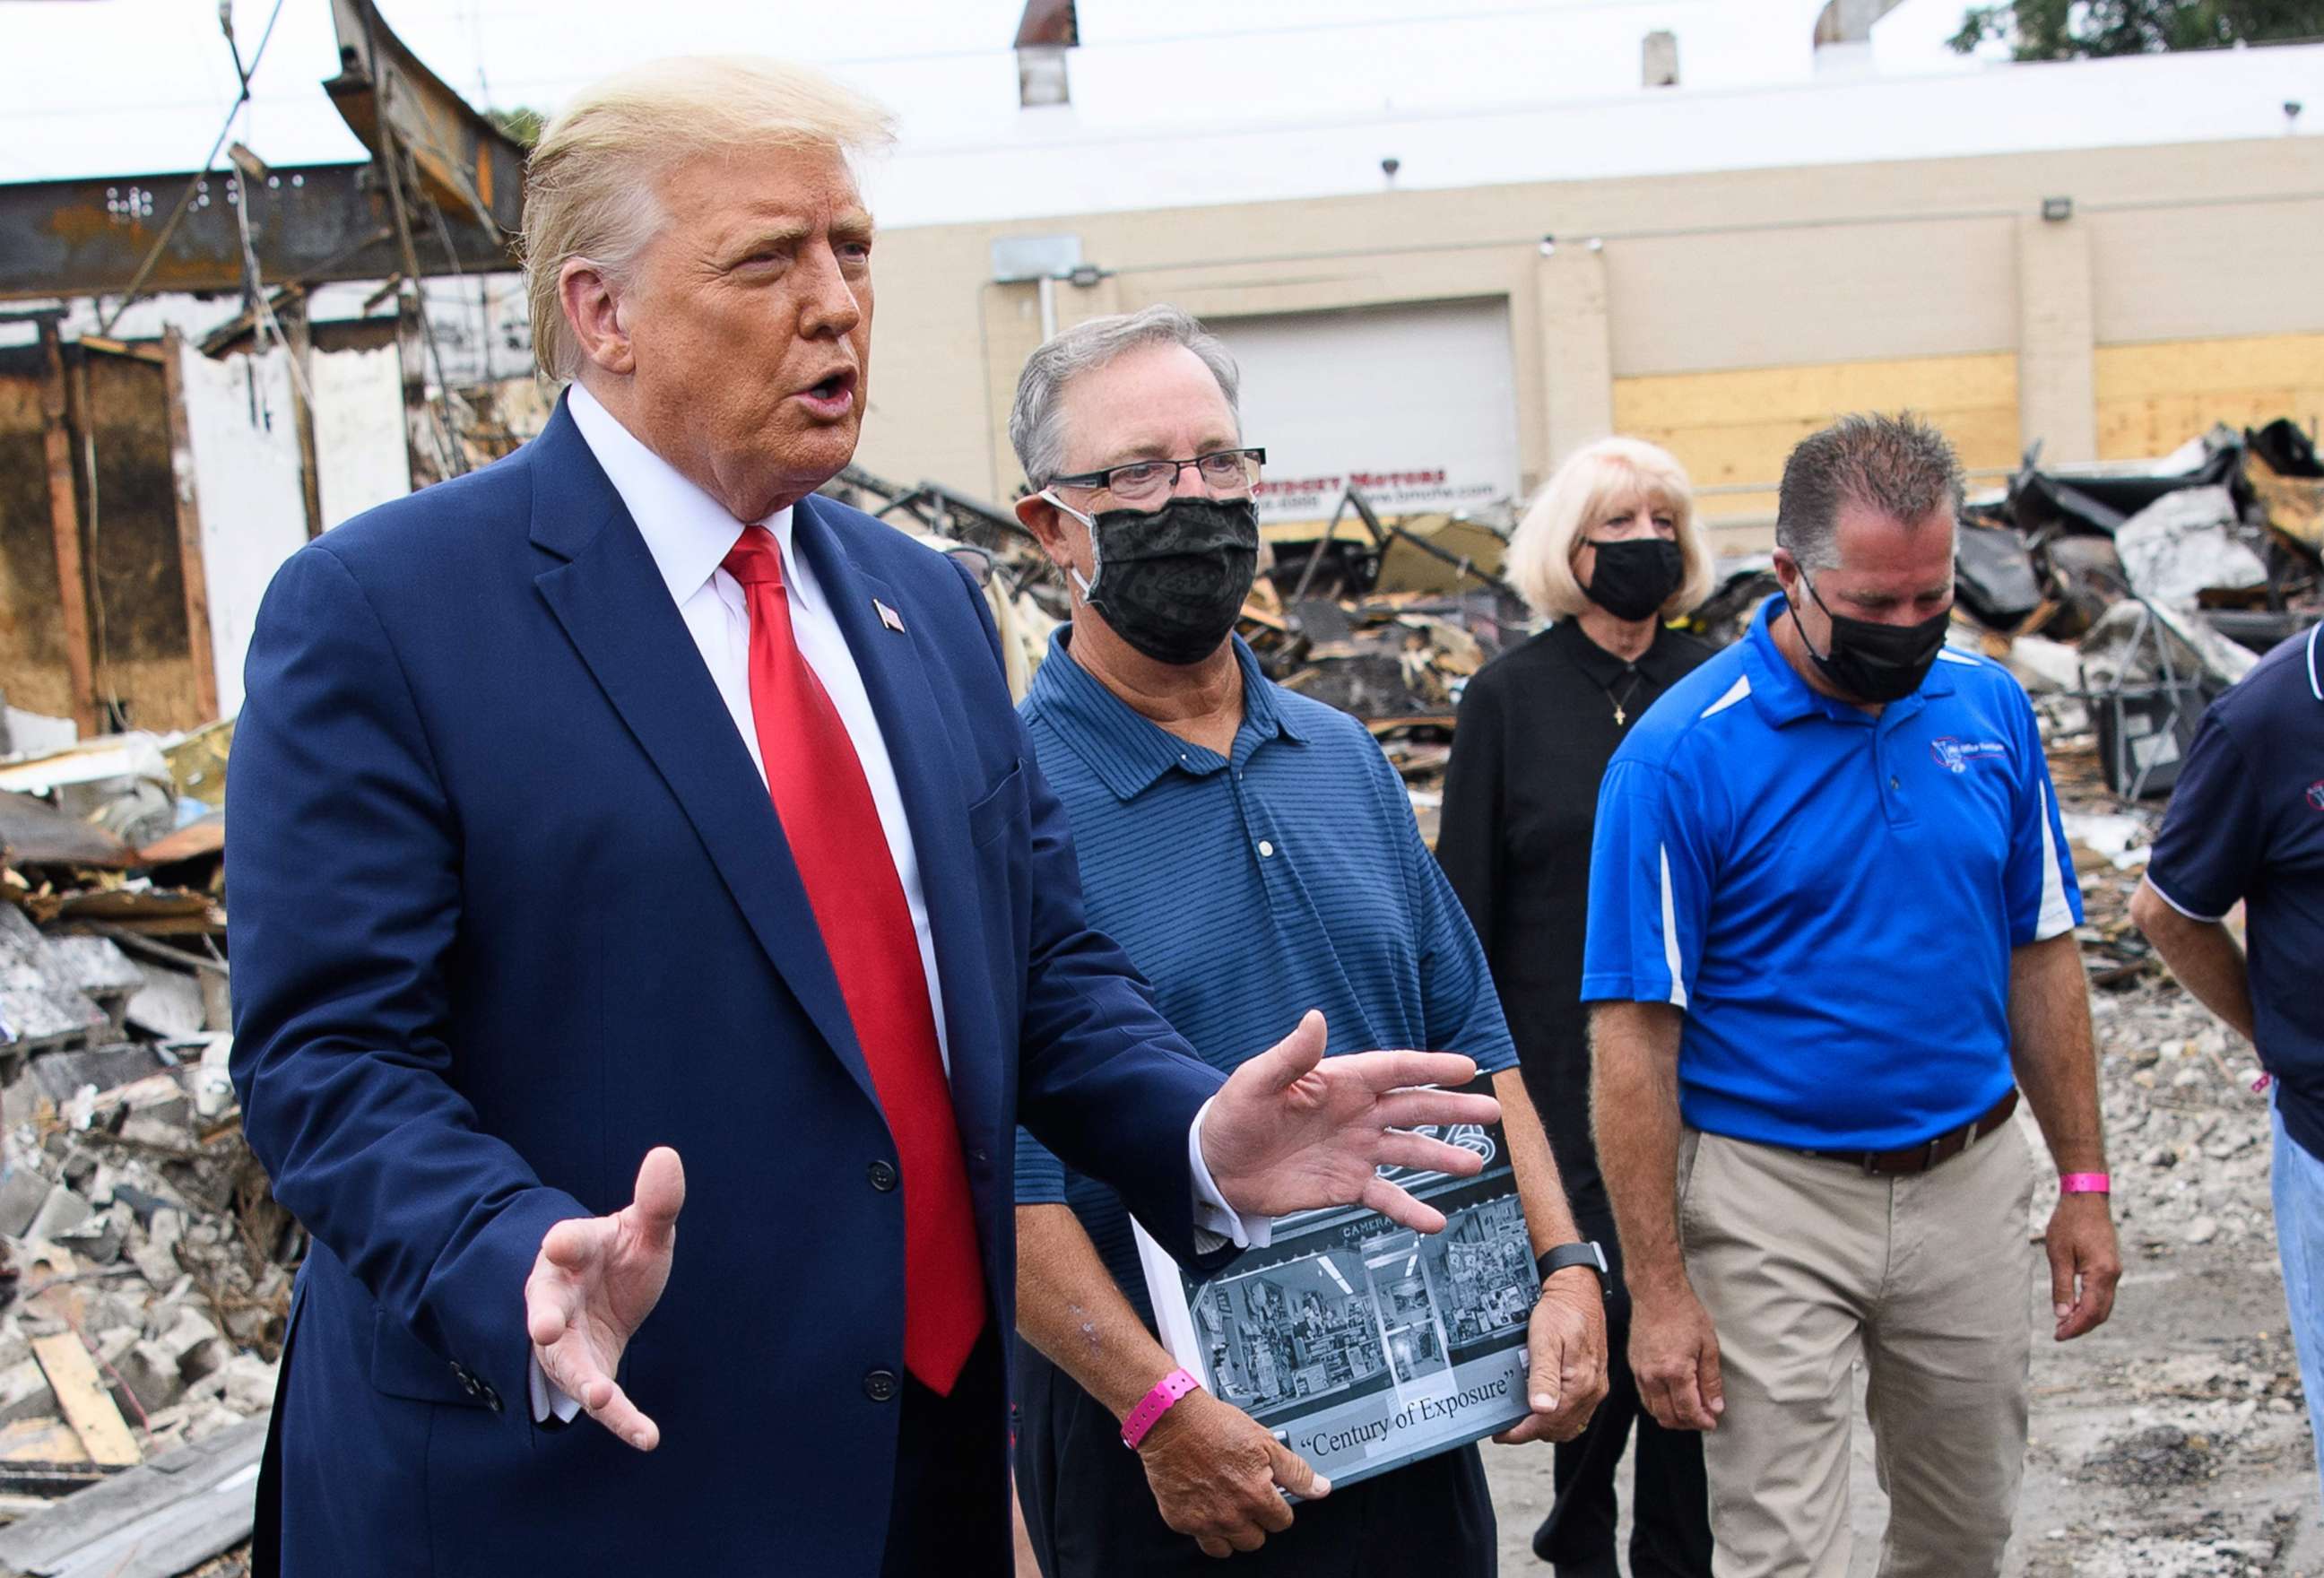 PHOTO: President Donald Trump speaks to the press as he tours an area affected by civil unrest in Kenosha, Wis., Sept. 1, 2020, as John Rode(C), the former owner of Rode's Camera Shop looks on holding a sign.